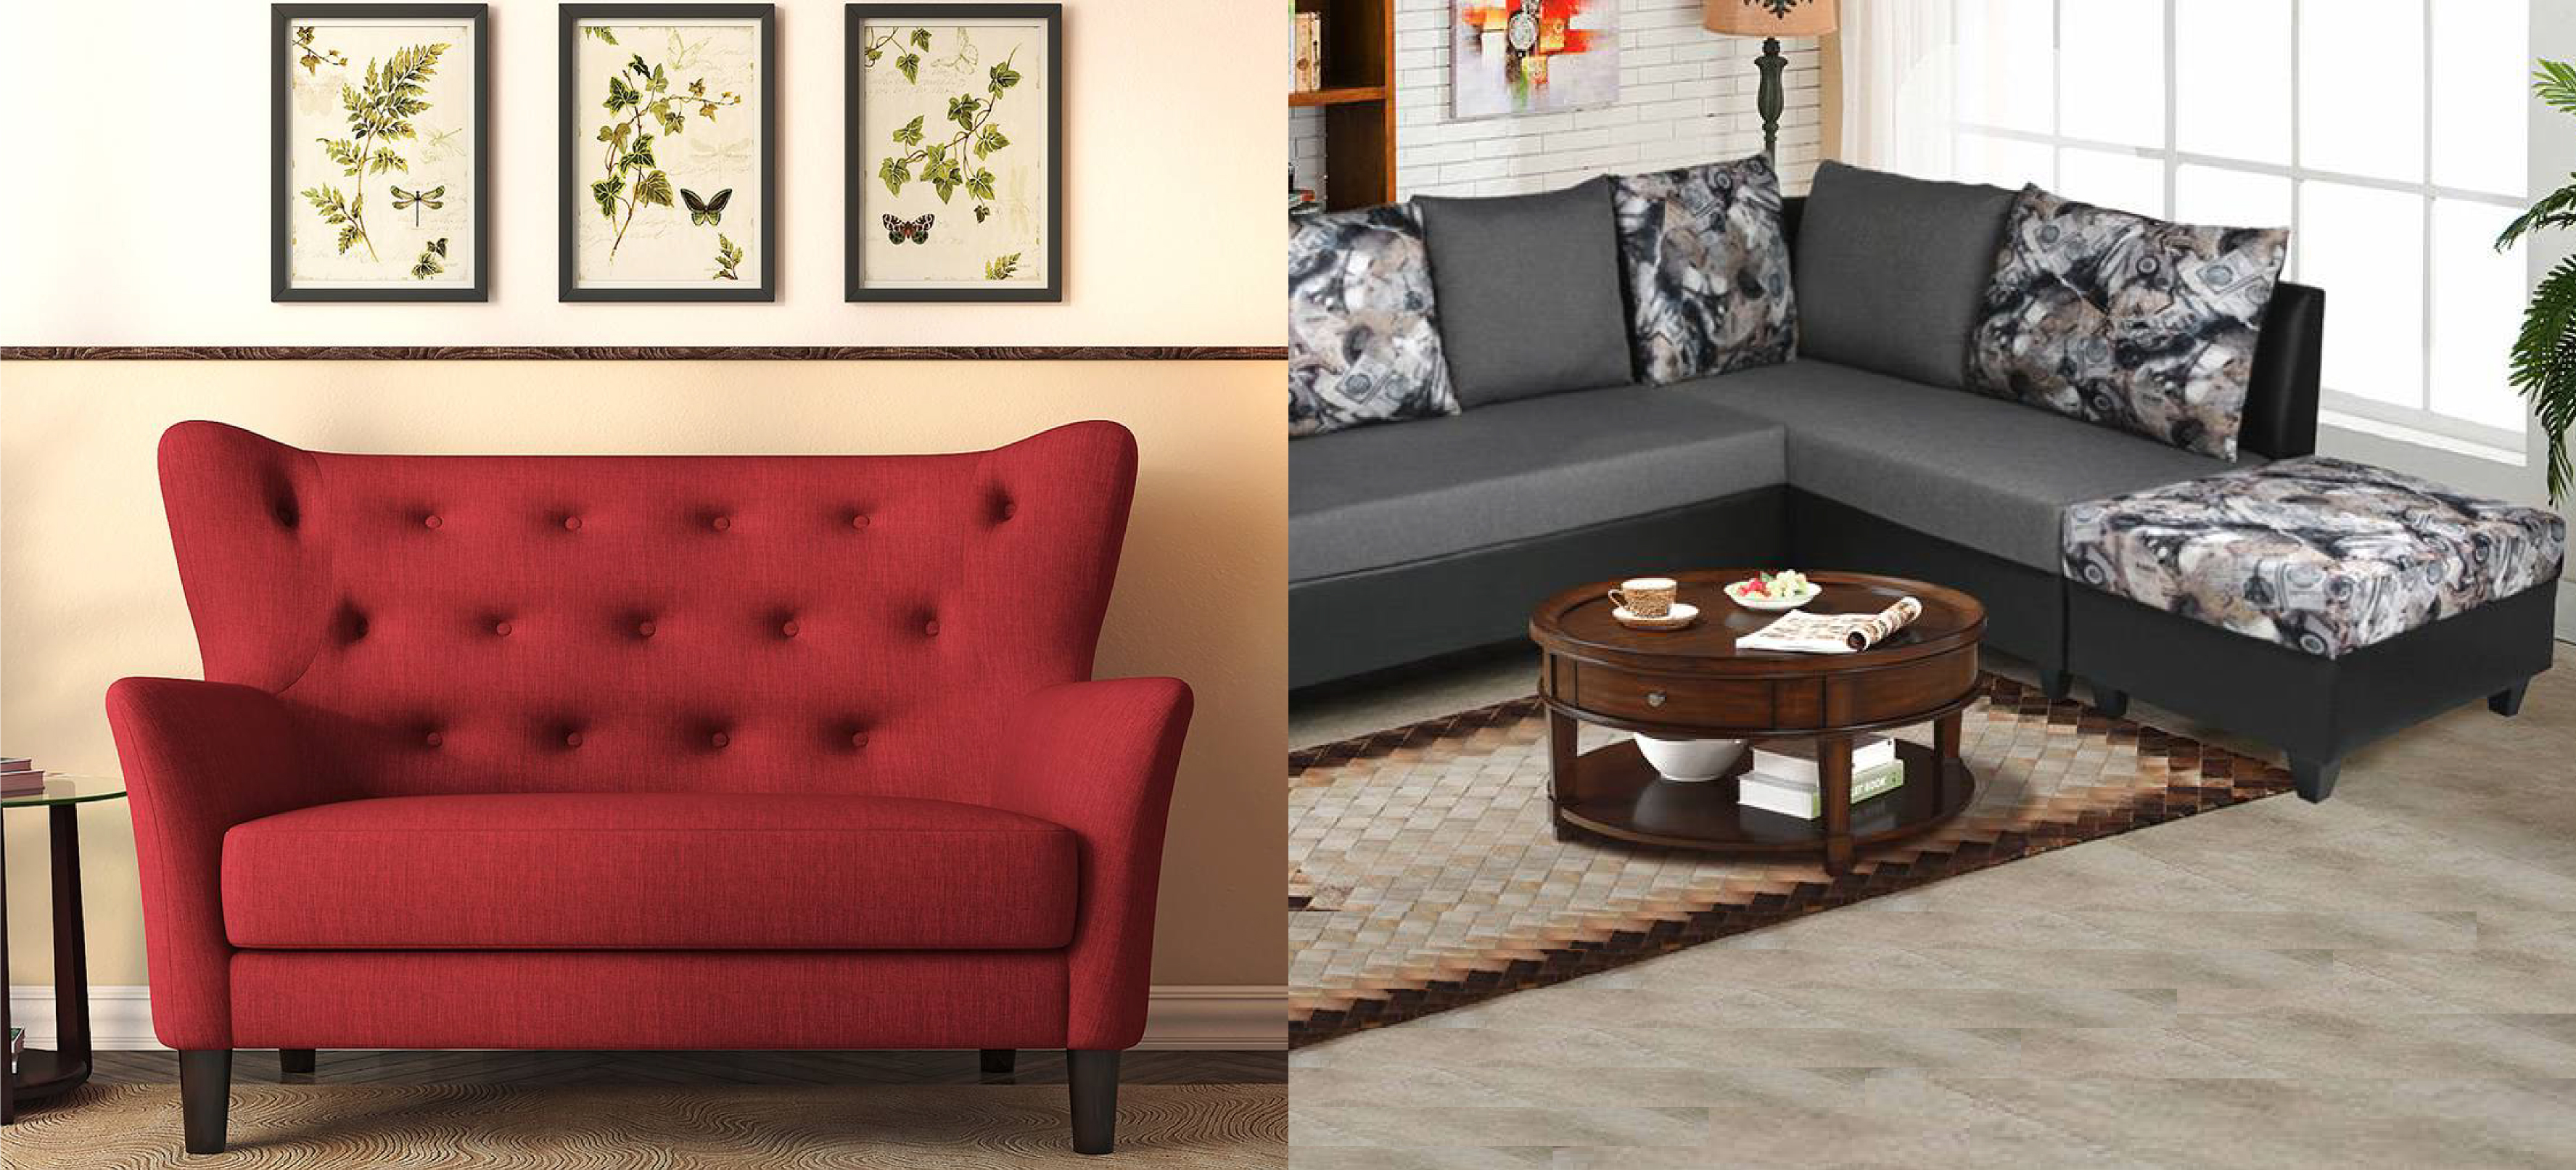  7 Reason Why You Should Buy  L Shapes Sofa For Your Home